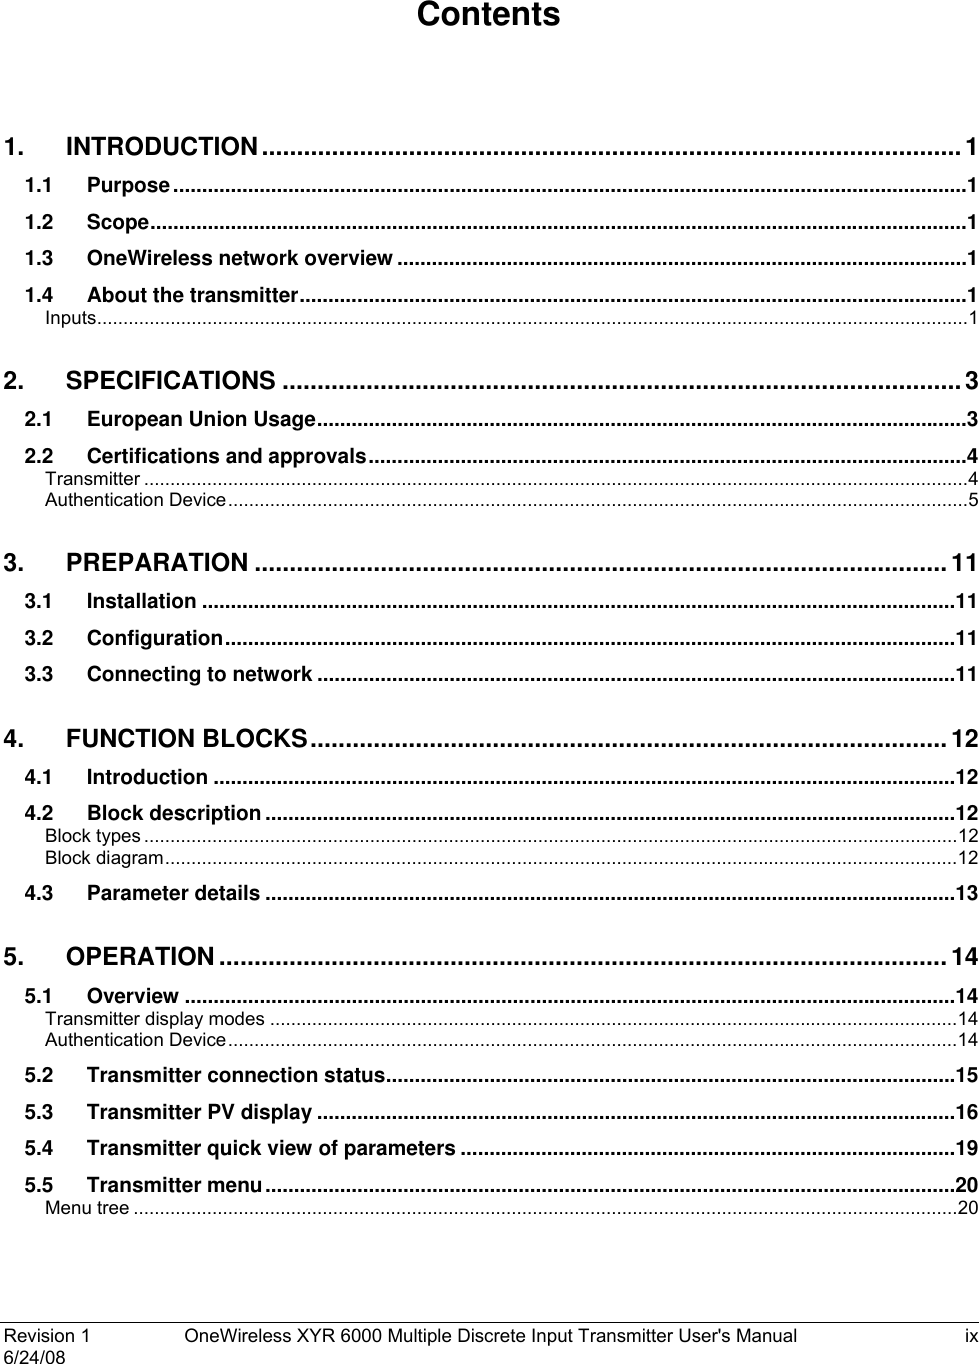  Revision 1  OneWireless XYR 6000 Multiple Discrete Input Transmitter User&apos;s Manual  ix 6/24/08    Contents  1. INTRODUCTION....................................................................................................1 1.1 Purpose..........................................................................................................................................1 1.2 Scope..............................................................................................................................................1 1.3 OneWireless network overview ...................................................................................................1 1.4 About the transmitter....................................................................................................................1 Inputs......................................................................................................................................................................1 2. SPECIFICATIONS .................................................................................................3 2.1 European Union Usage.................................................................................................................3 2.2 Certifications and approvals........................................................................................................4 Transmitter .............................................................................................................................................................4 Authentication Device.............................................................................................................................................5 3. PREPARATION ...................................................................................................11 3.1 Installation ...................................................................................................................................11 3.2 Configuration...............................................................................................................................11 3.3 Connecting to network ...............................................................................................................11 4. FUNCTION BLOCKS........................................................................................... 12 4.1 Introduction .................................................................................................................................12 4.2 Block description ........................................................................................................................12 Block types ...........................................................................................................................................................12 Block diagram.......................................................................................................................................................12 4.3 Parameter details ........................................................................................................................13 5. OPERATION ........................................................................................................14 5.1 Overview ......................................................................................................................................14 Transmitter display modes ...................................................................................................................................14 Authentication Device...........................................................................................................................................14 5.2 Transmitter connection status...................................................................................................15 5.3 Transmitter PV display ...............................................................................................................16 5.4 Transmitter quick view of parameters ......................................................................................19 5.5 Transmitter menu........................................................................................................................20 Menu tree .............................................................................................................................................................20 